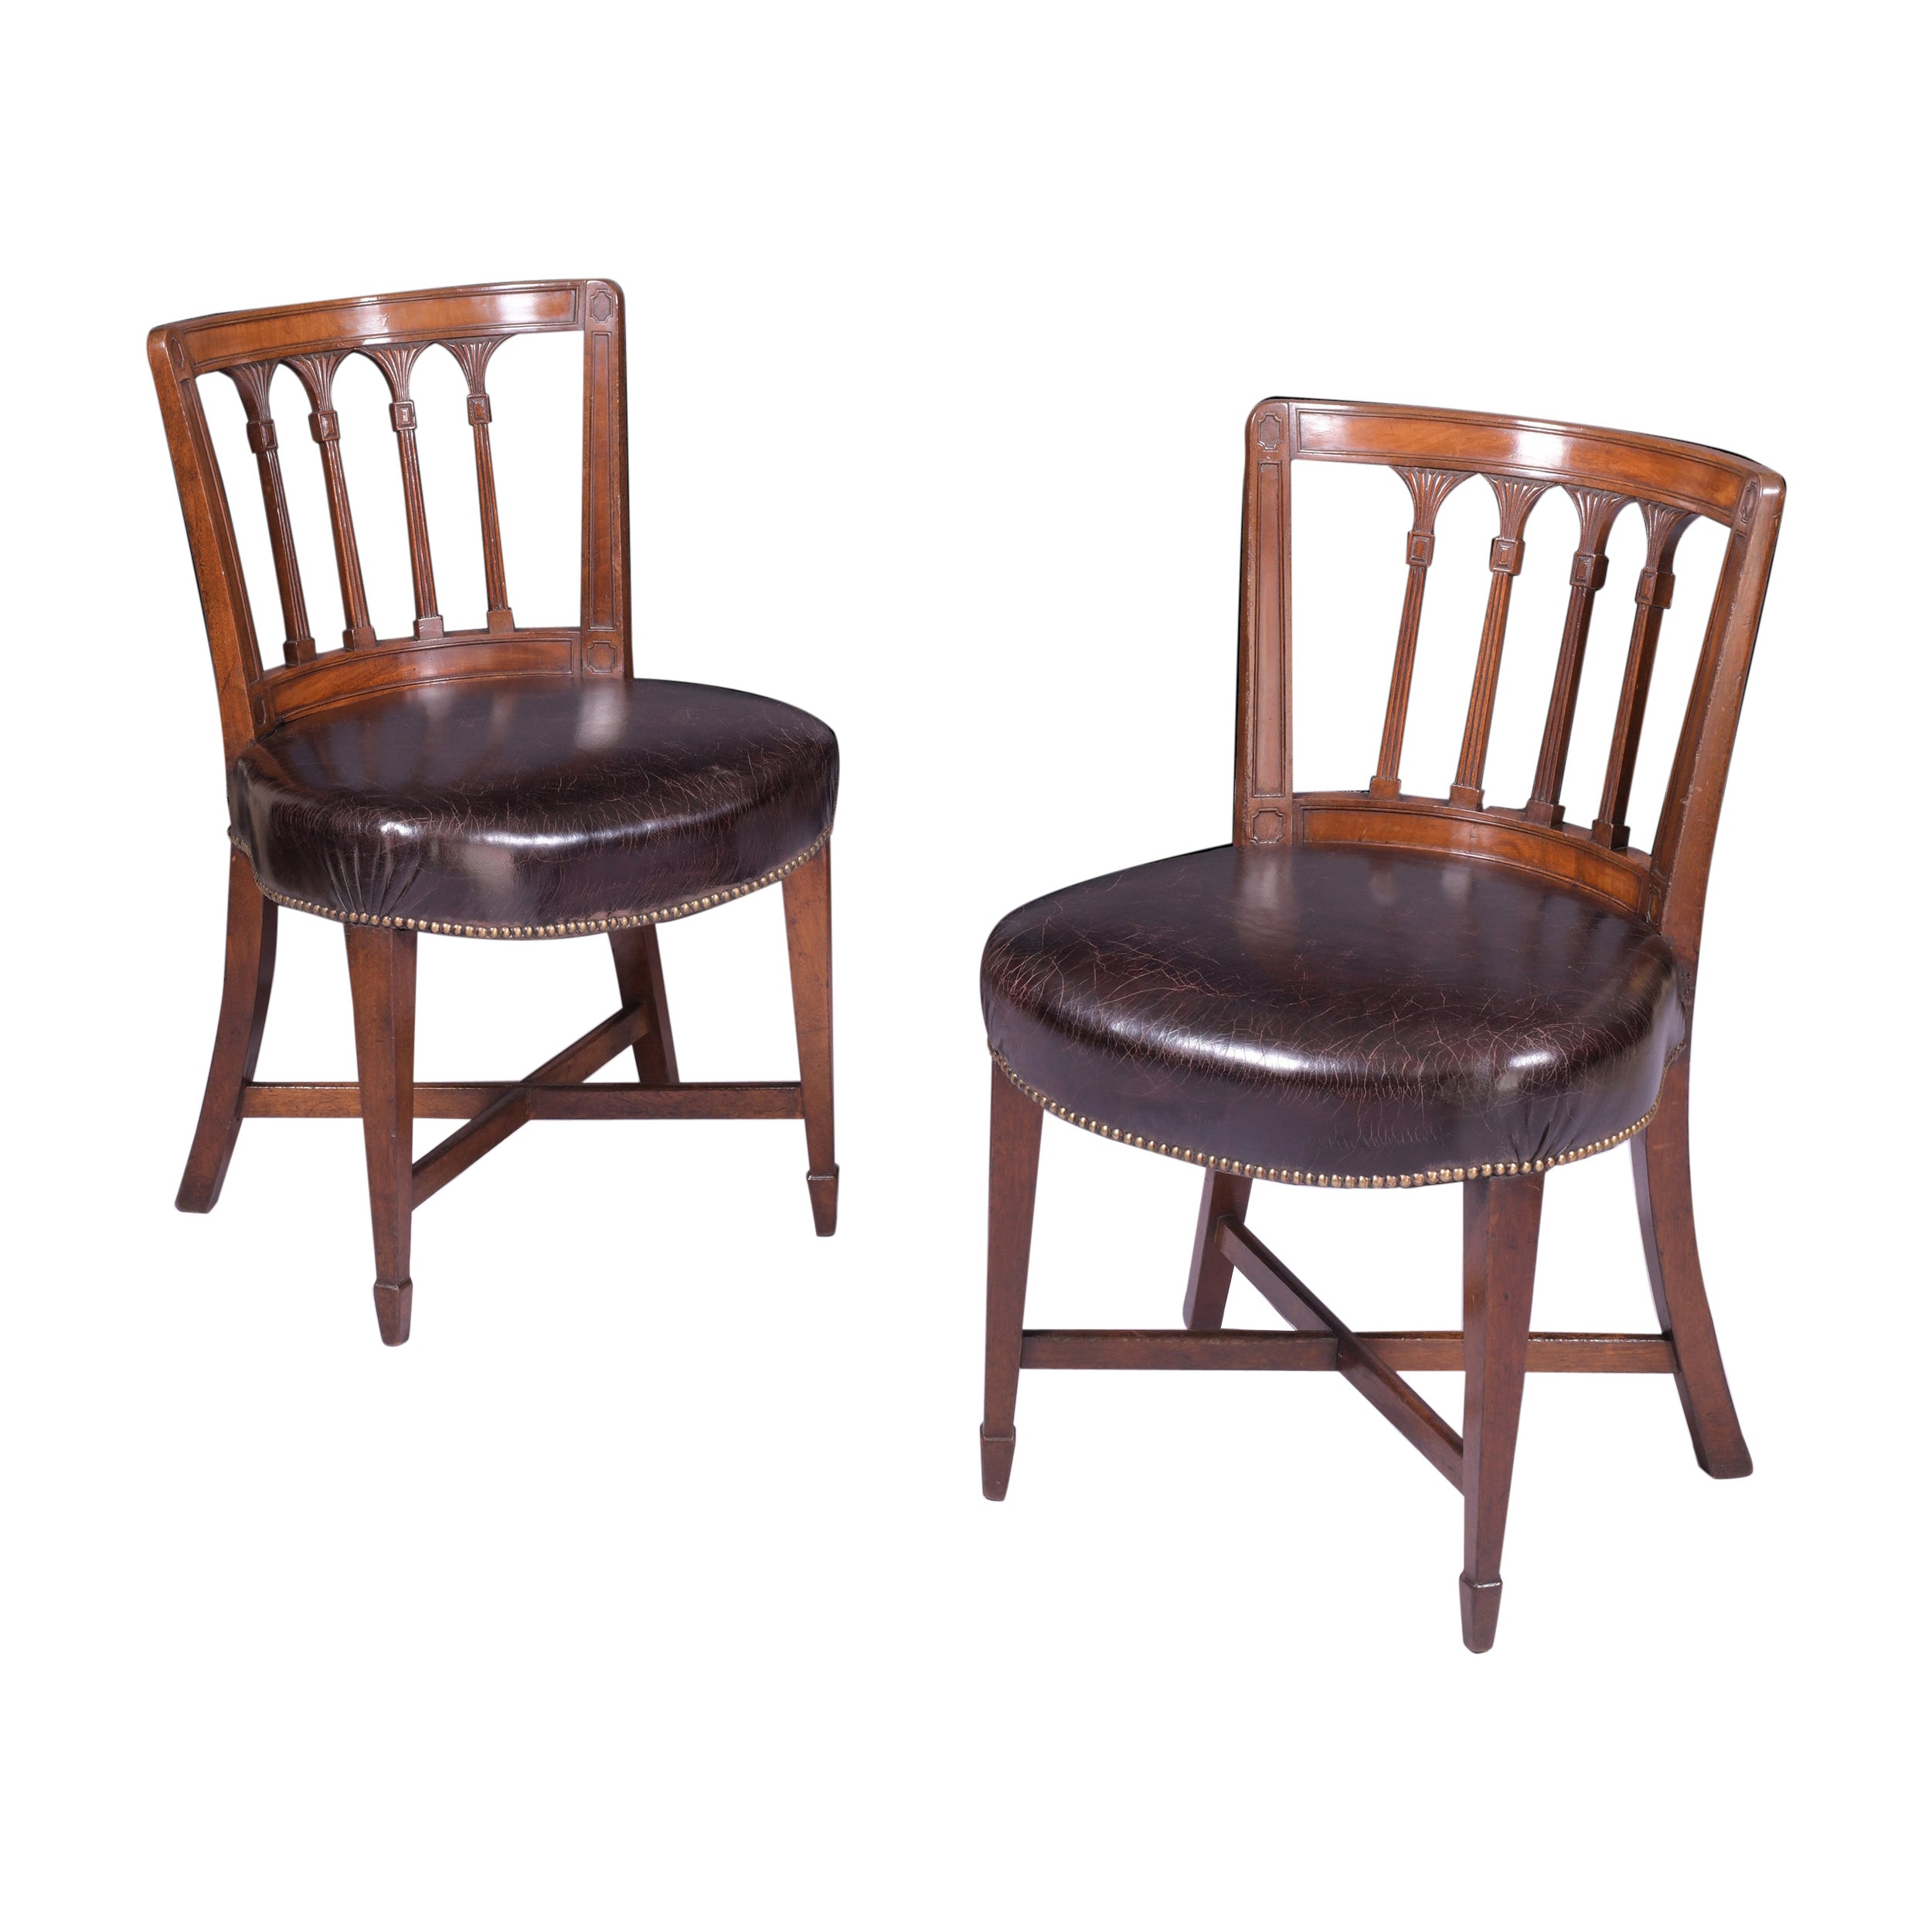 Pair of Early 19th Century Side Chairs Attributed to Gillows of Lancaster